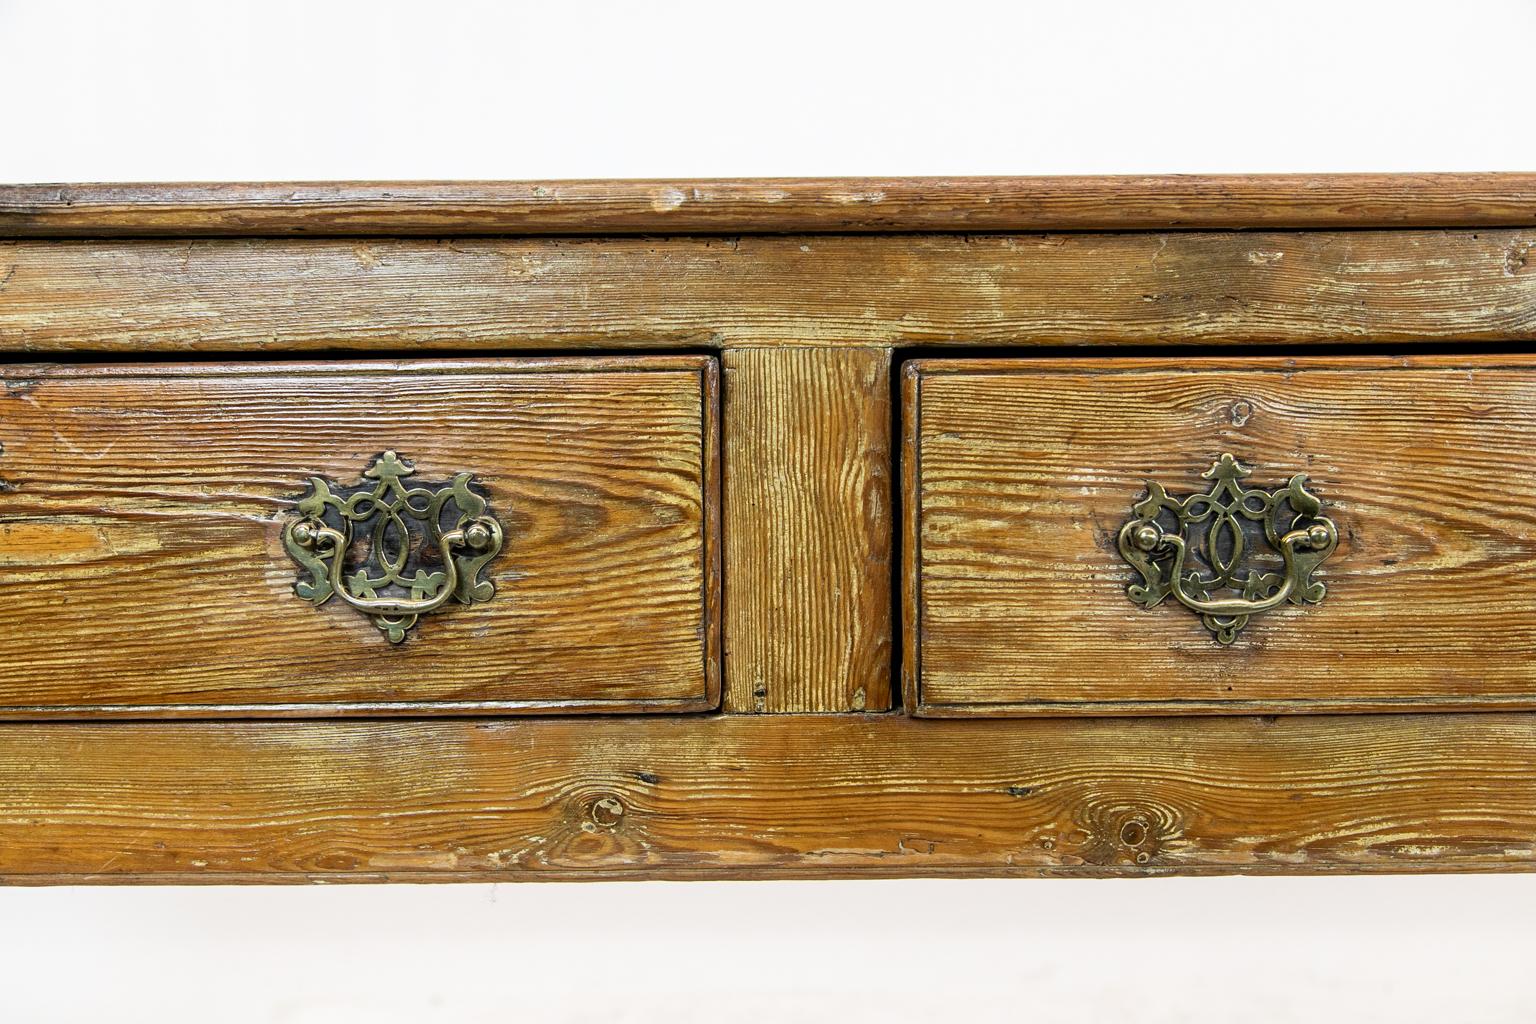 19th century English pine sideboard with three incised cockbeaded drawers and open trellis pulls and escutcheons. There is a bullnosed molded top and a carved plate groove at the back of the top.